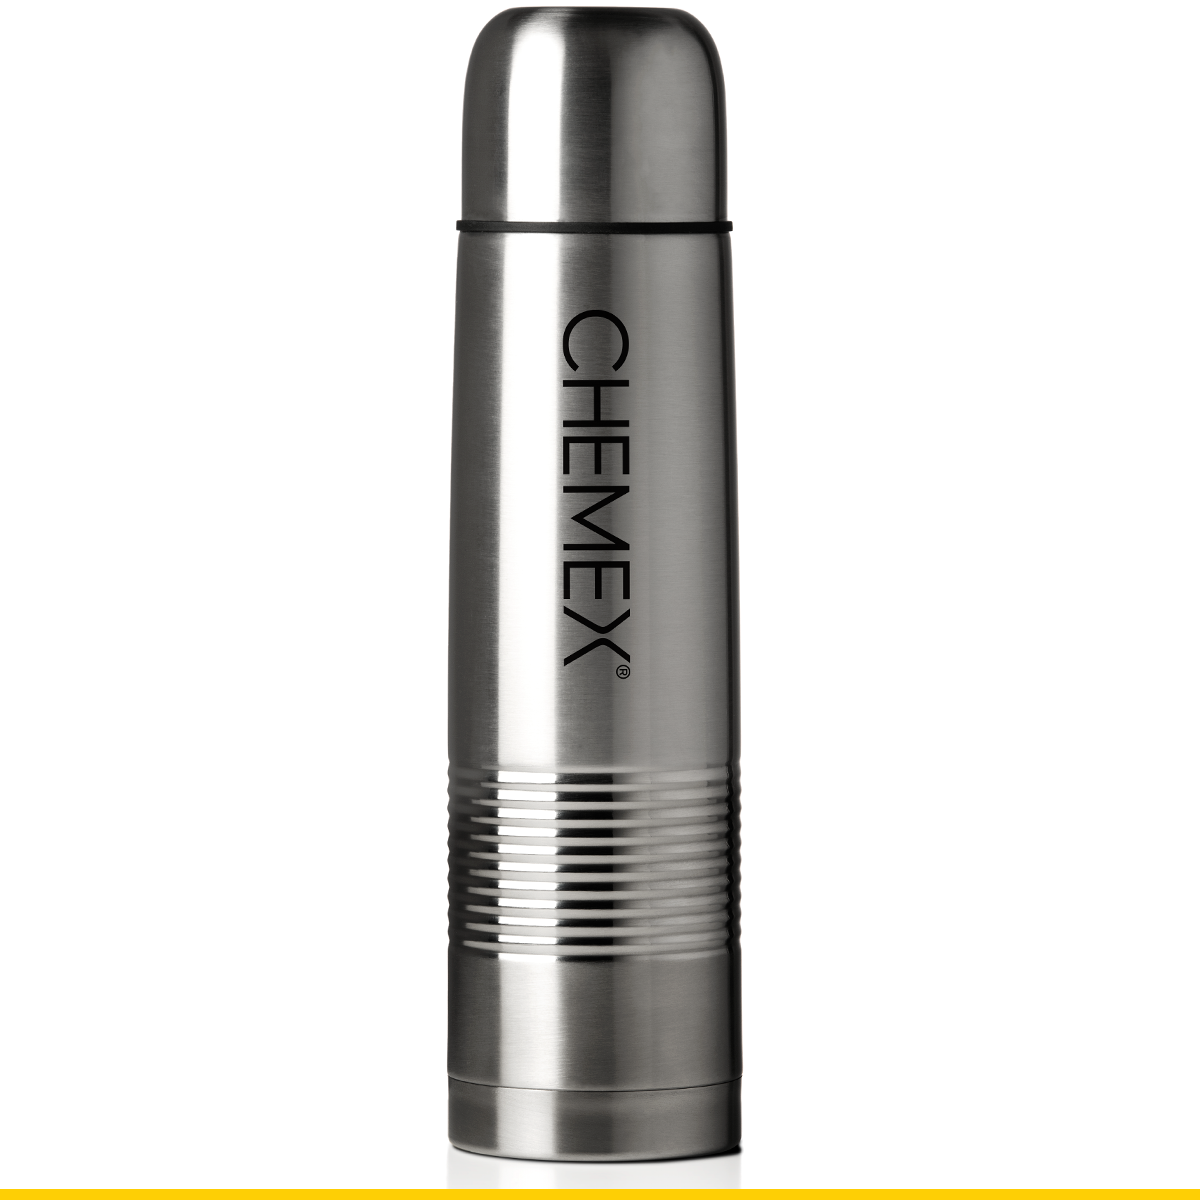 https://store.chemexcoffeemaker.com/media/catalog/product/c/h/chemex-acessories-thermos-1liter.png